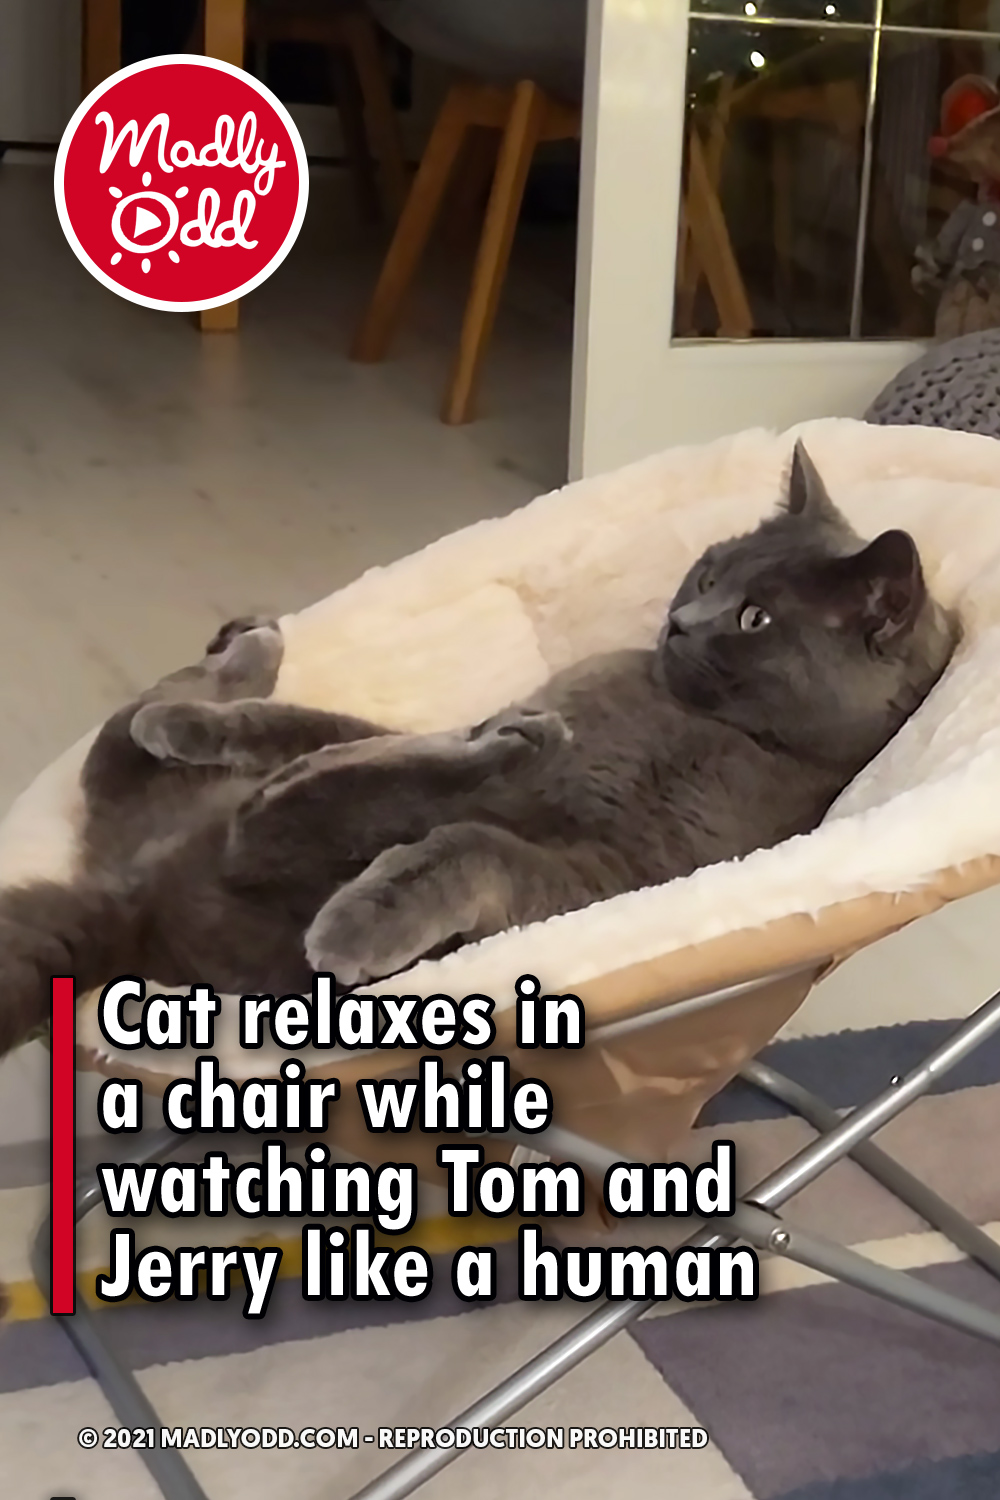 Cat relaxes in a chair while watching Tom and Jerry like a human